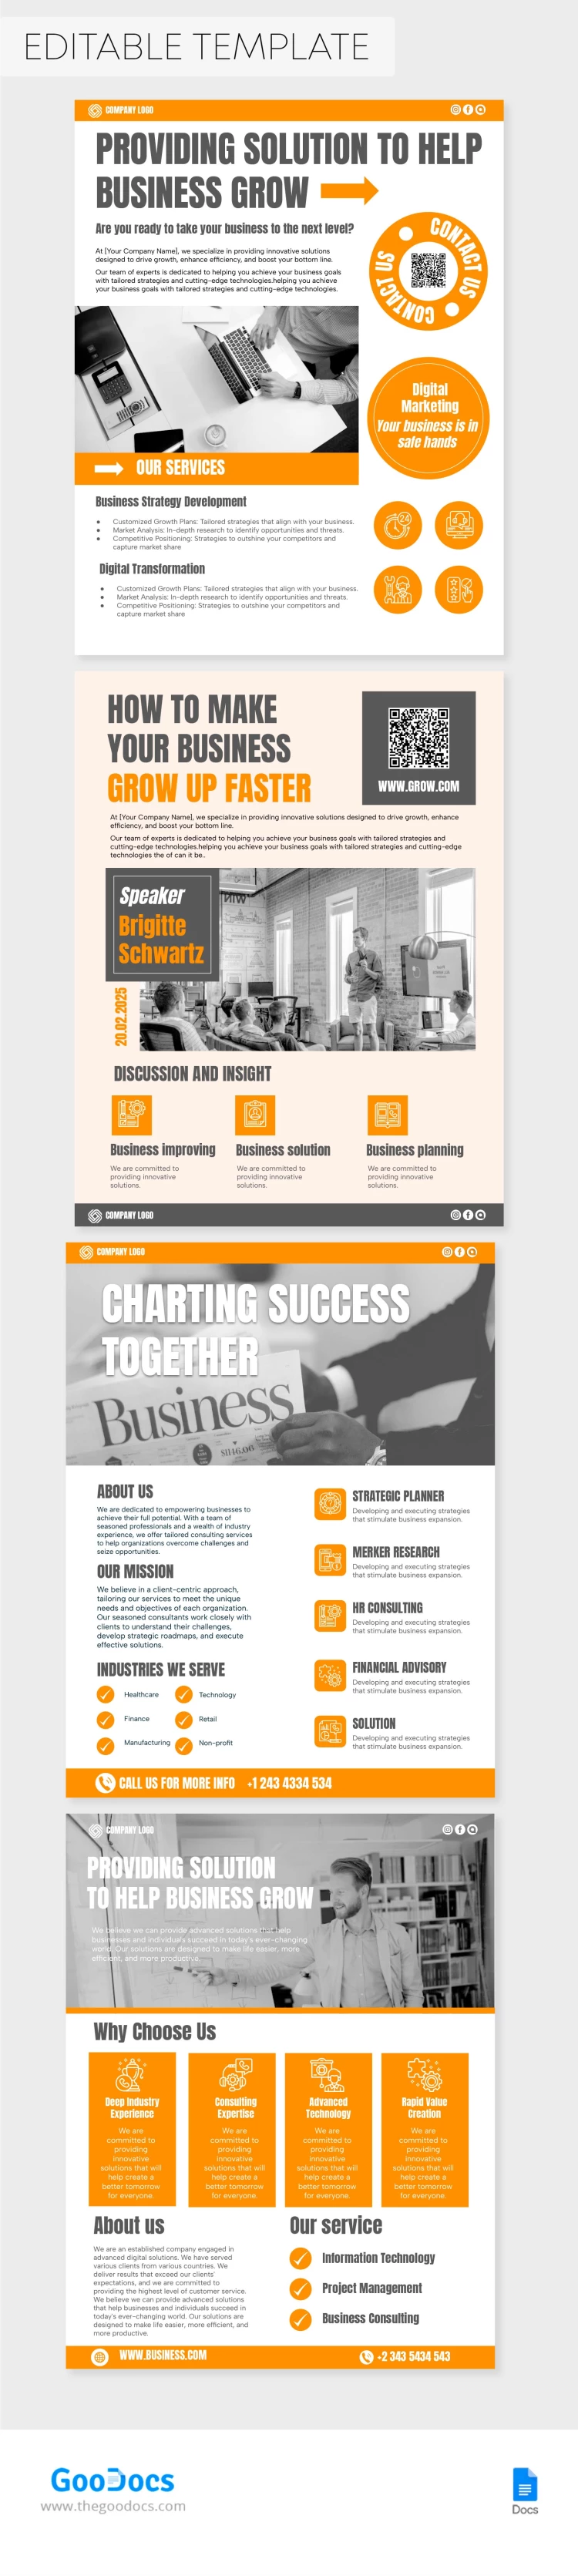 White Business Flyer - free Google Docs Template - 10068739